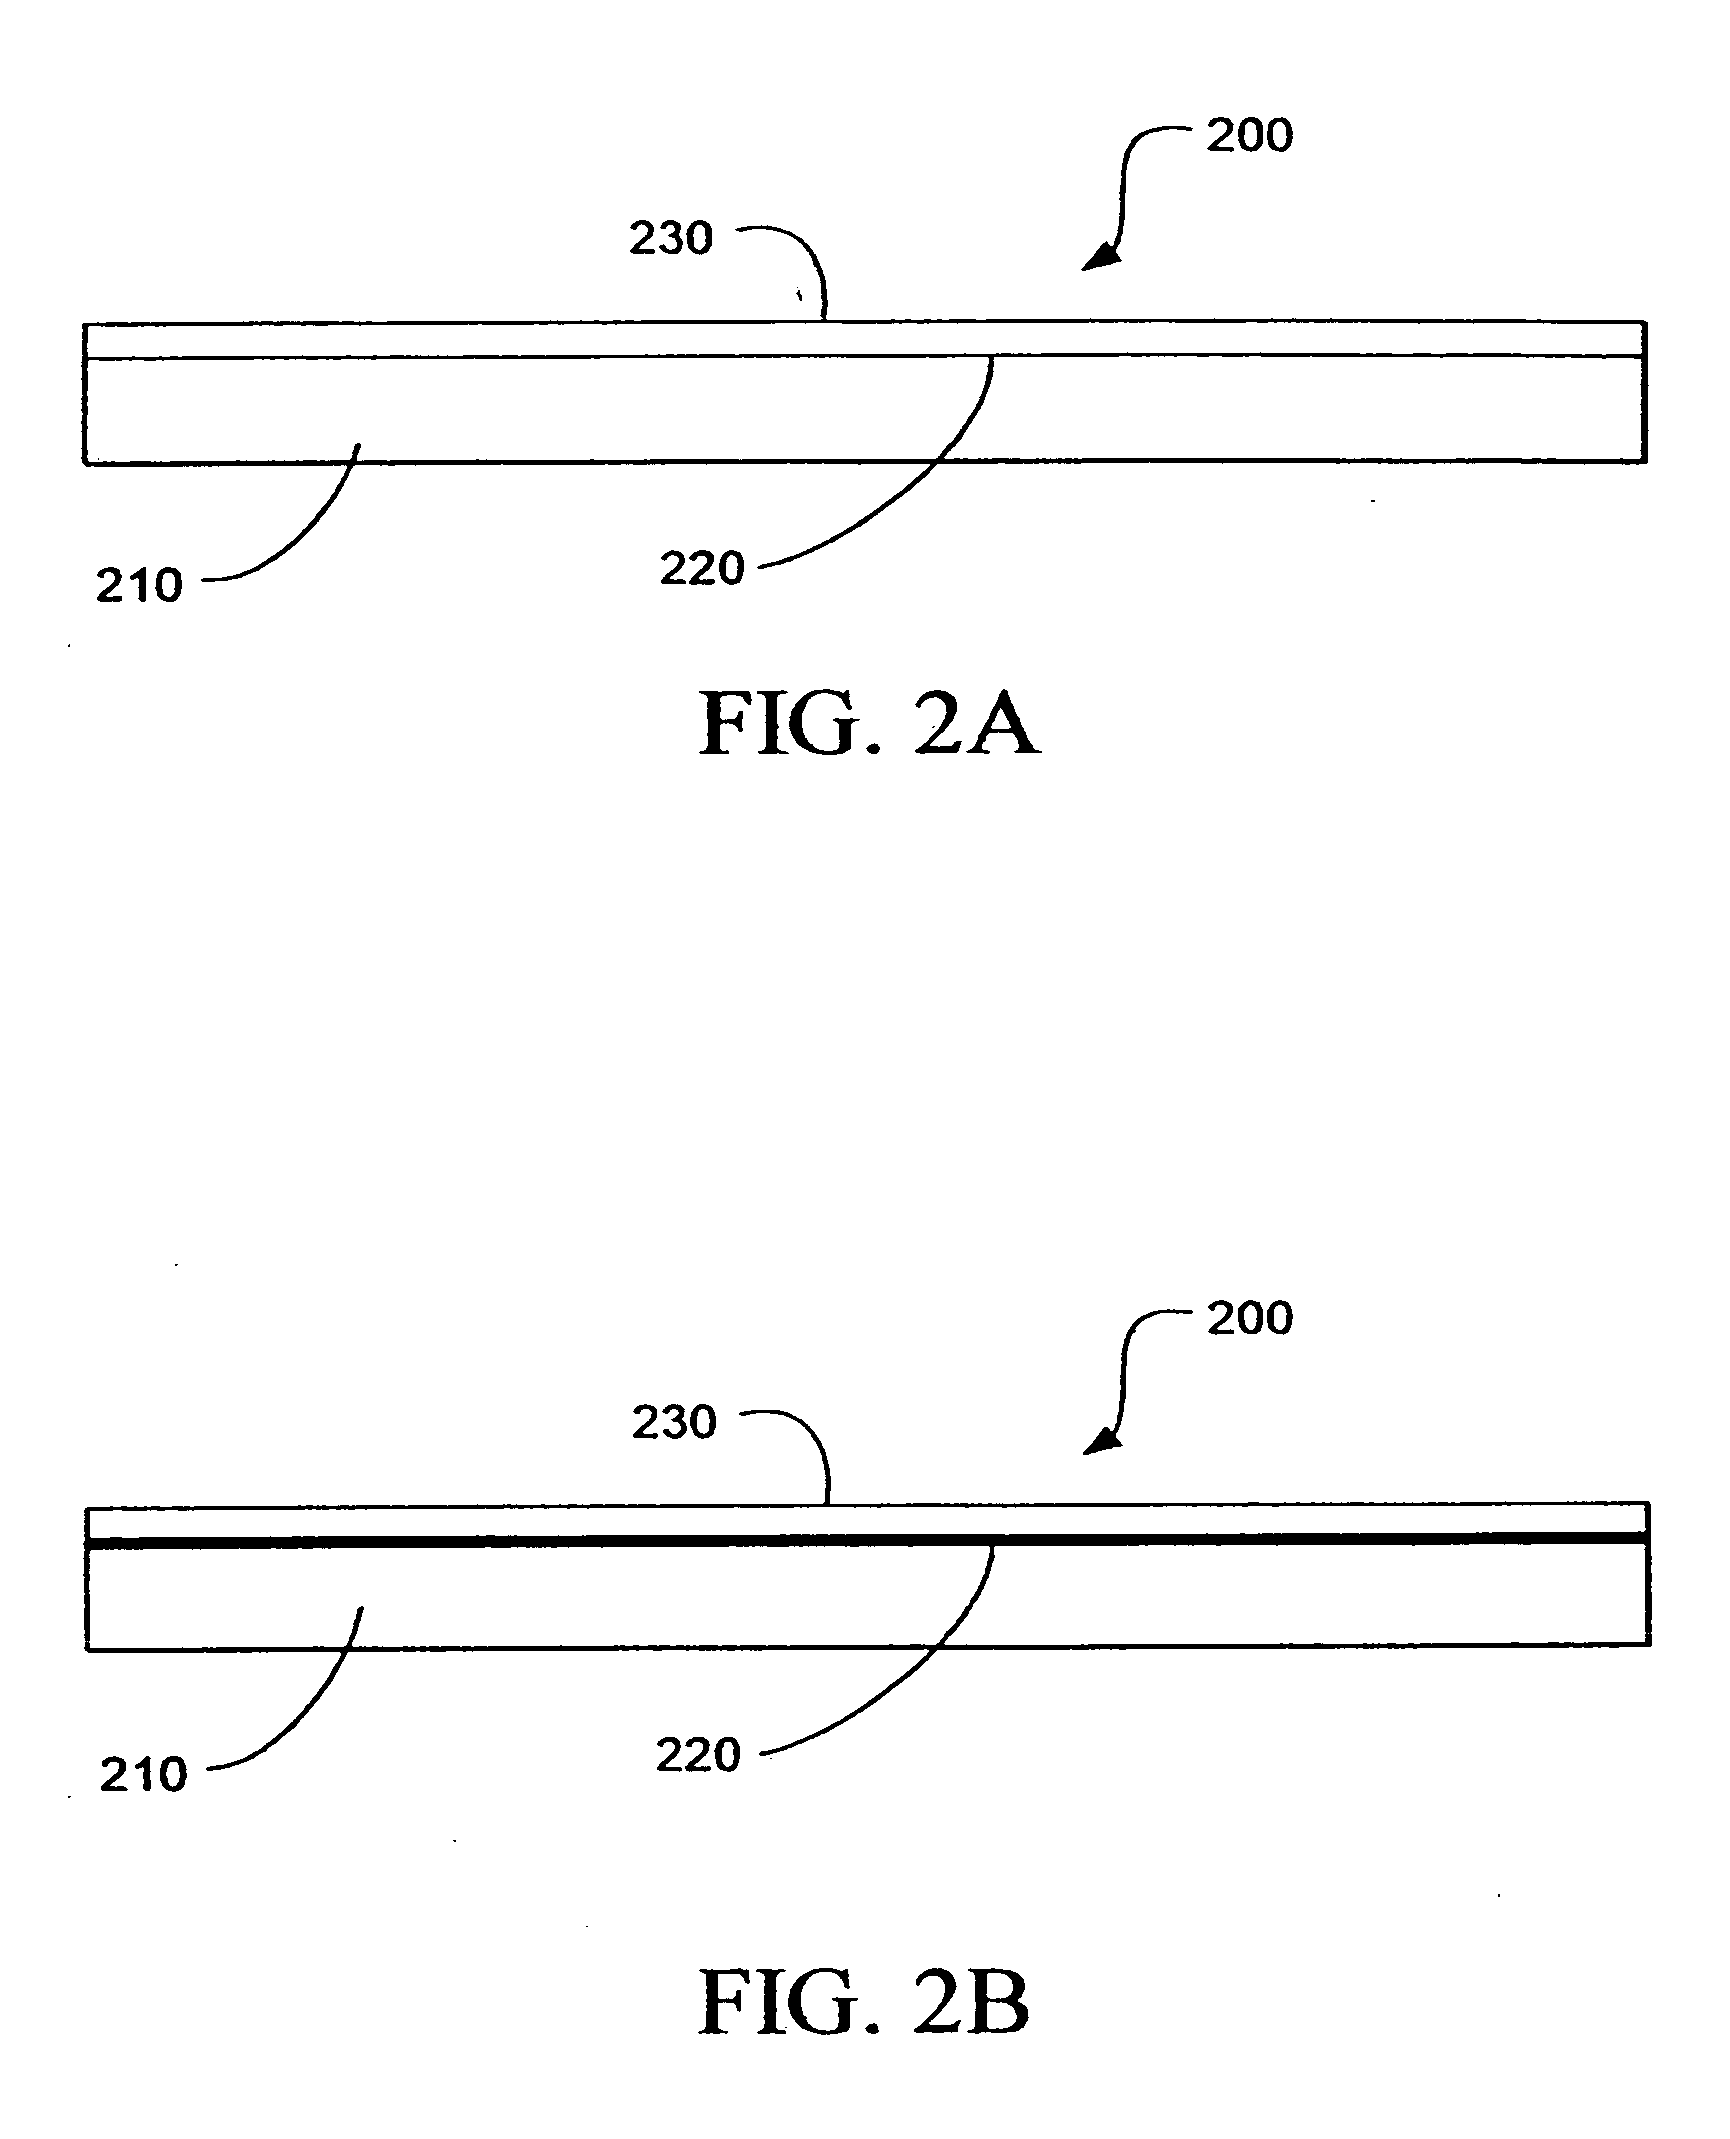 Directory read inhibitor for optical storage media